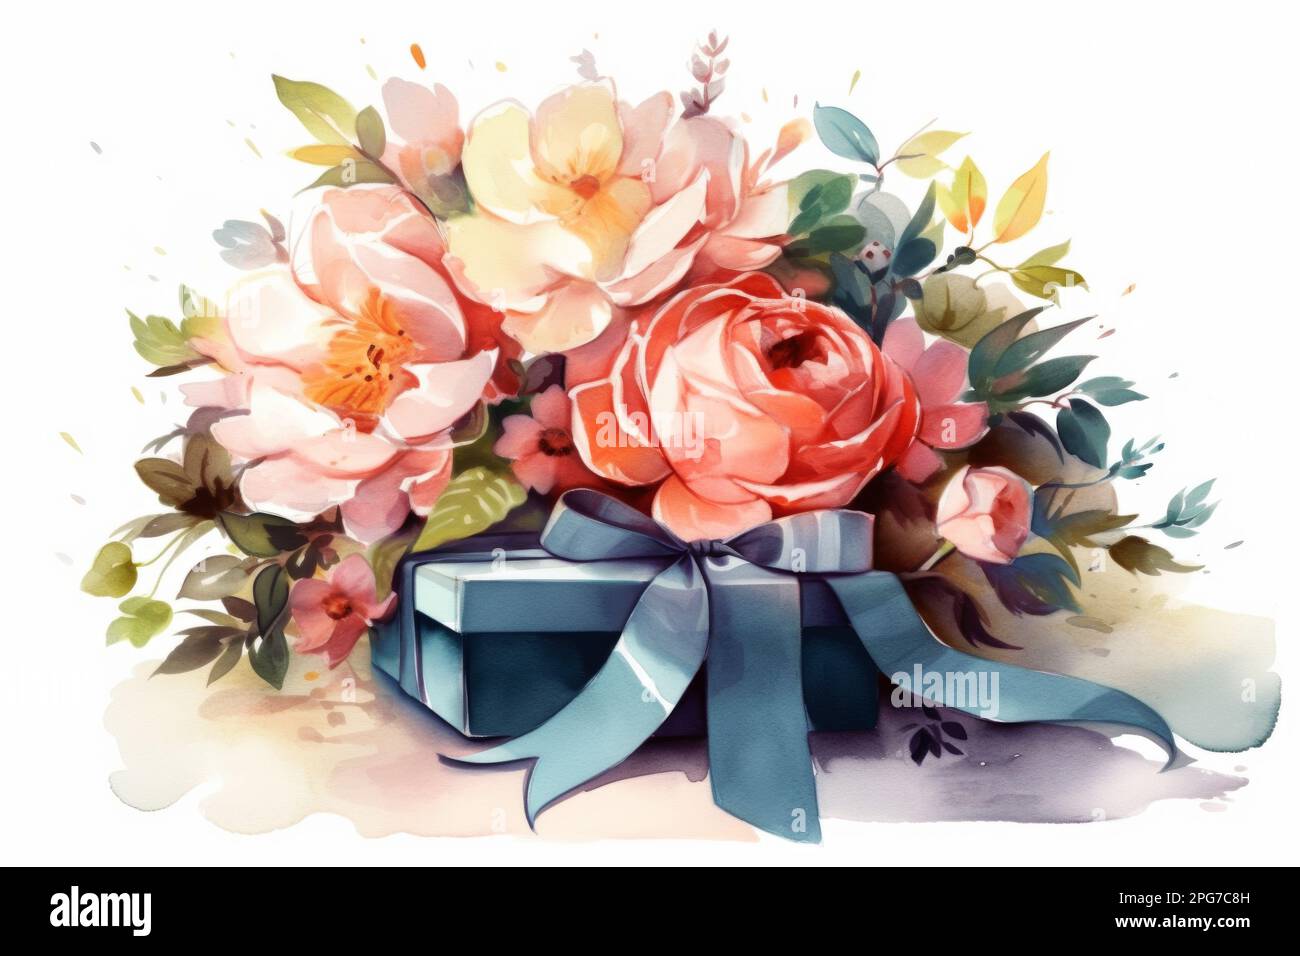 Bouquet of various flowers lies on a festive box with a satin ribbon, on a  light background. Festive composition for Mother's Day, birthday, wedding  Stock Photo - Alamy